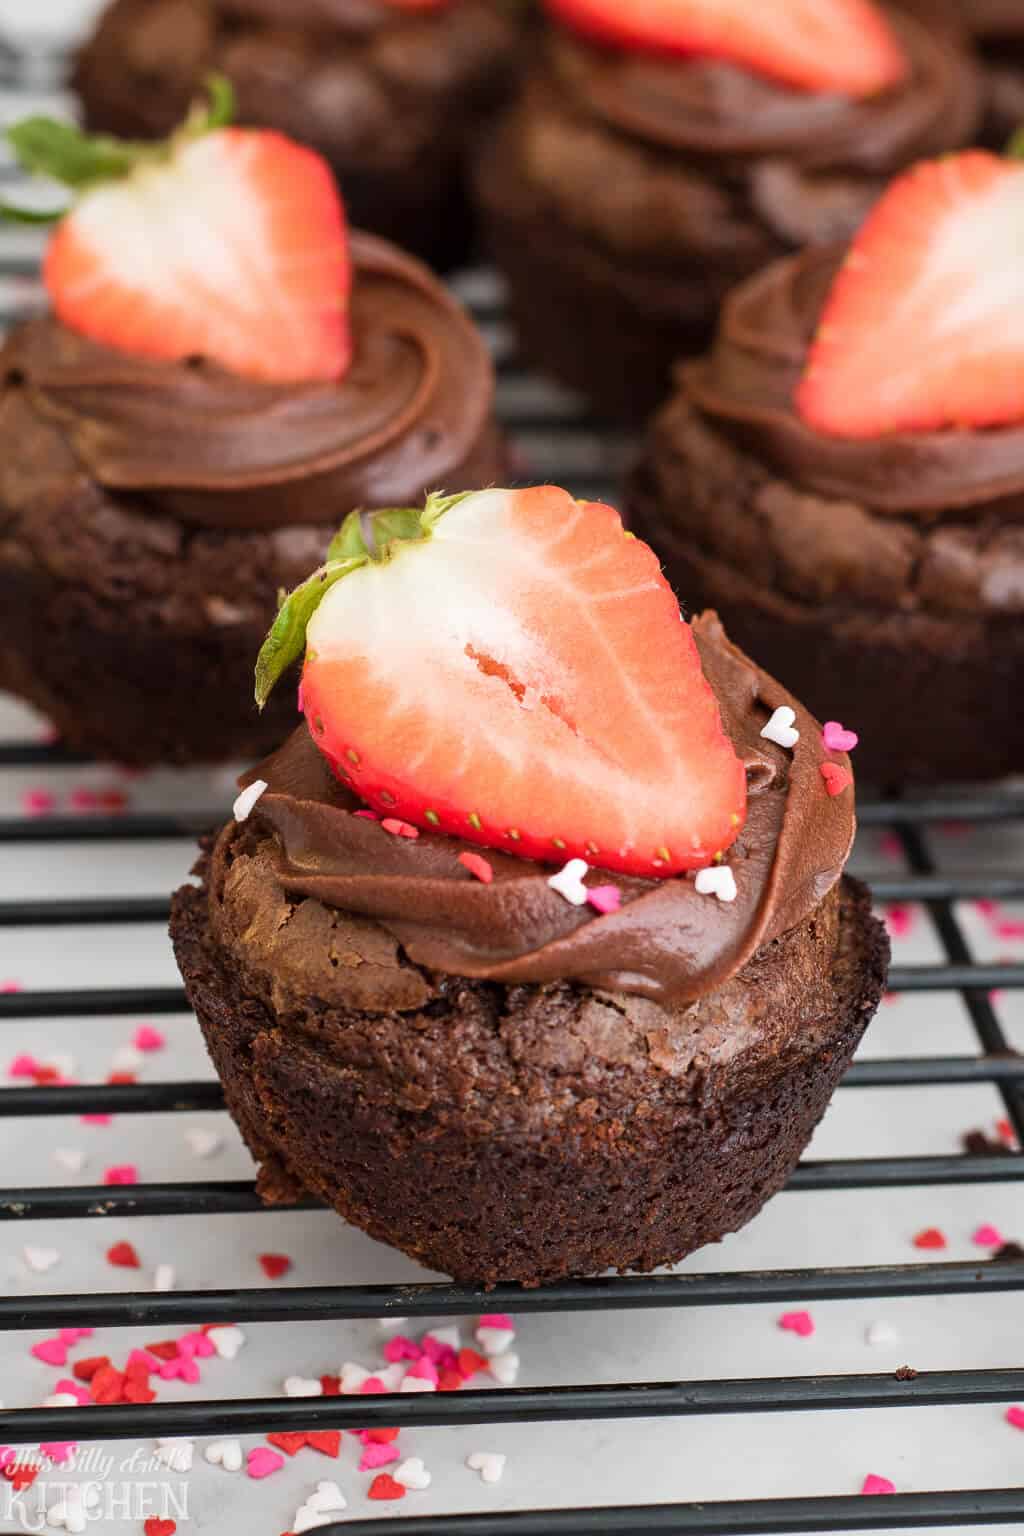 Strawberry Brownie Cups, an easy yet delicious treat for your Valentine! #Recipe from ThisSillyGirlsKitchen.com #brownie #strawberry #chocolate